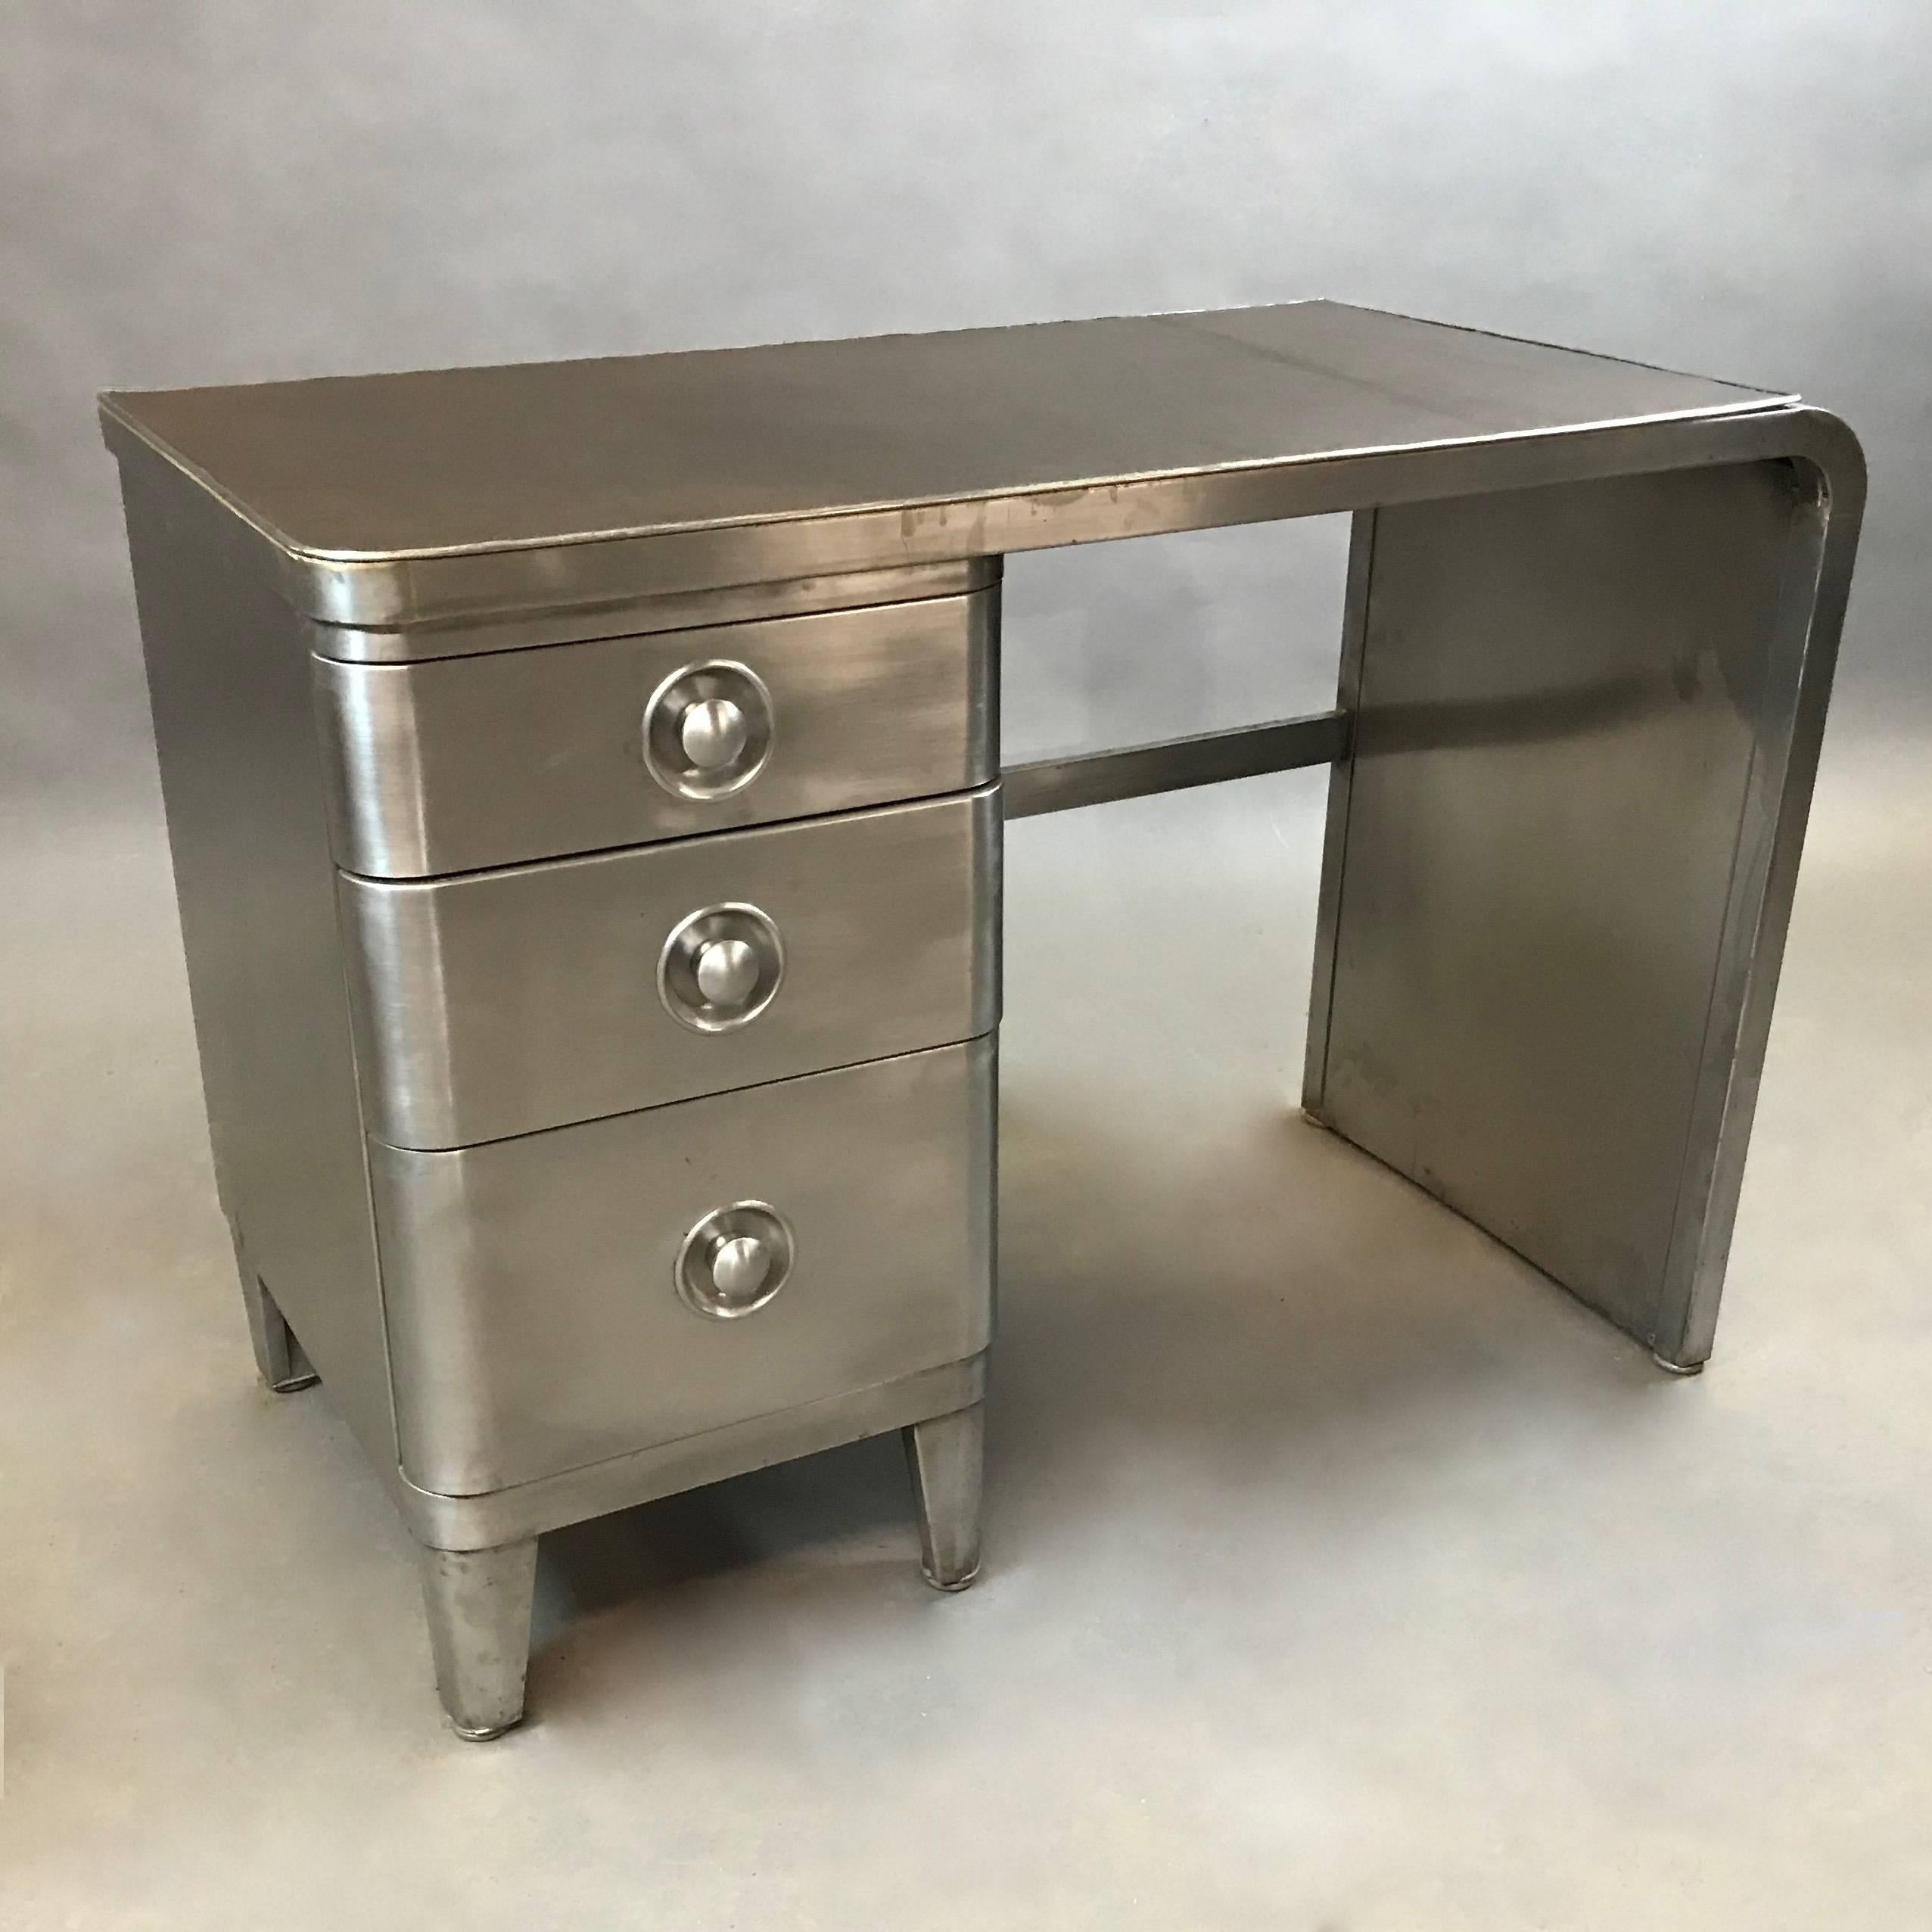 Machine-age, industrial, brushed steel desk by Norman Bel Geddes for Simmons Furniture features three drawers with recessed pulls, waterfall pedestal and custom brown leather top.